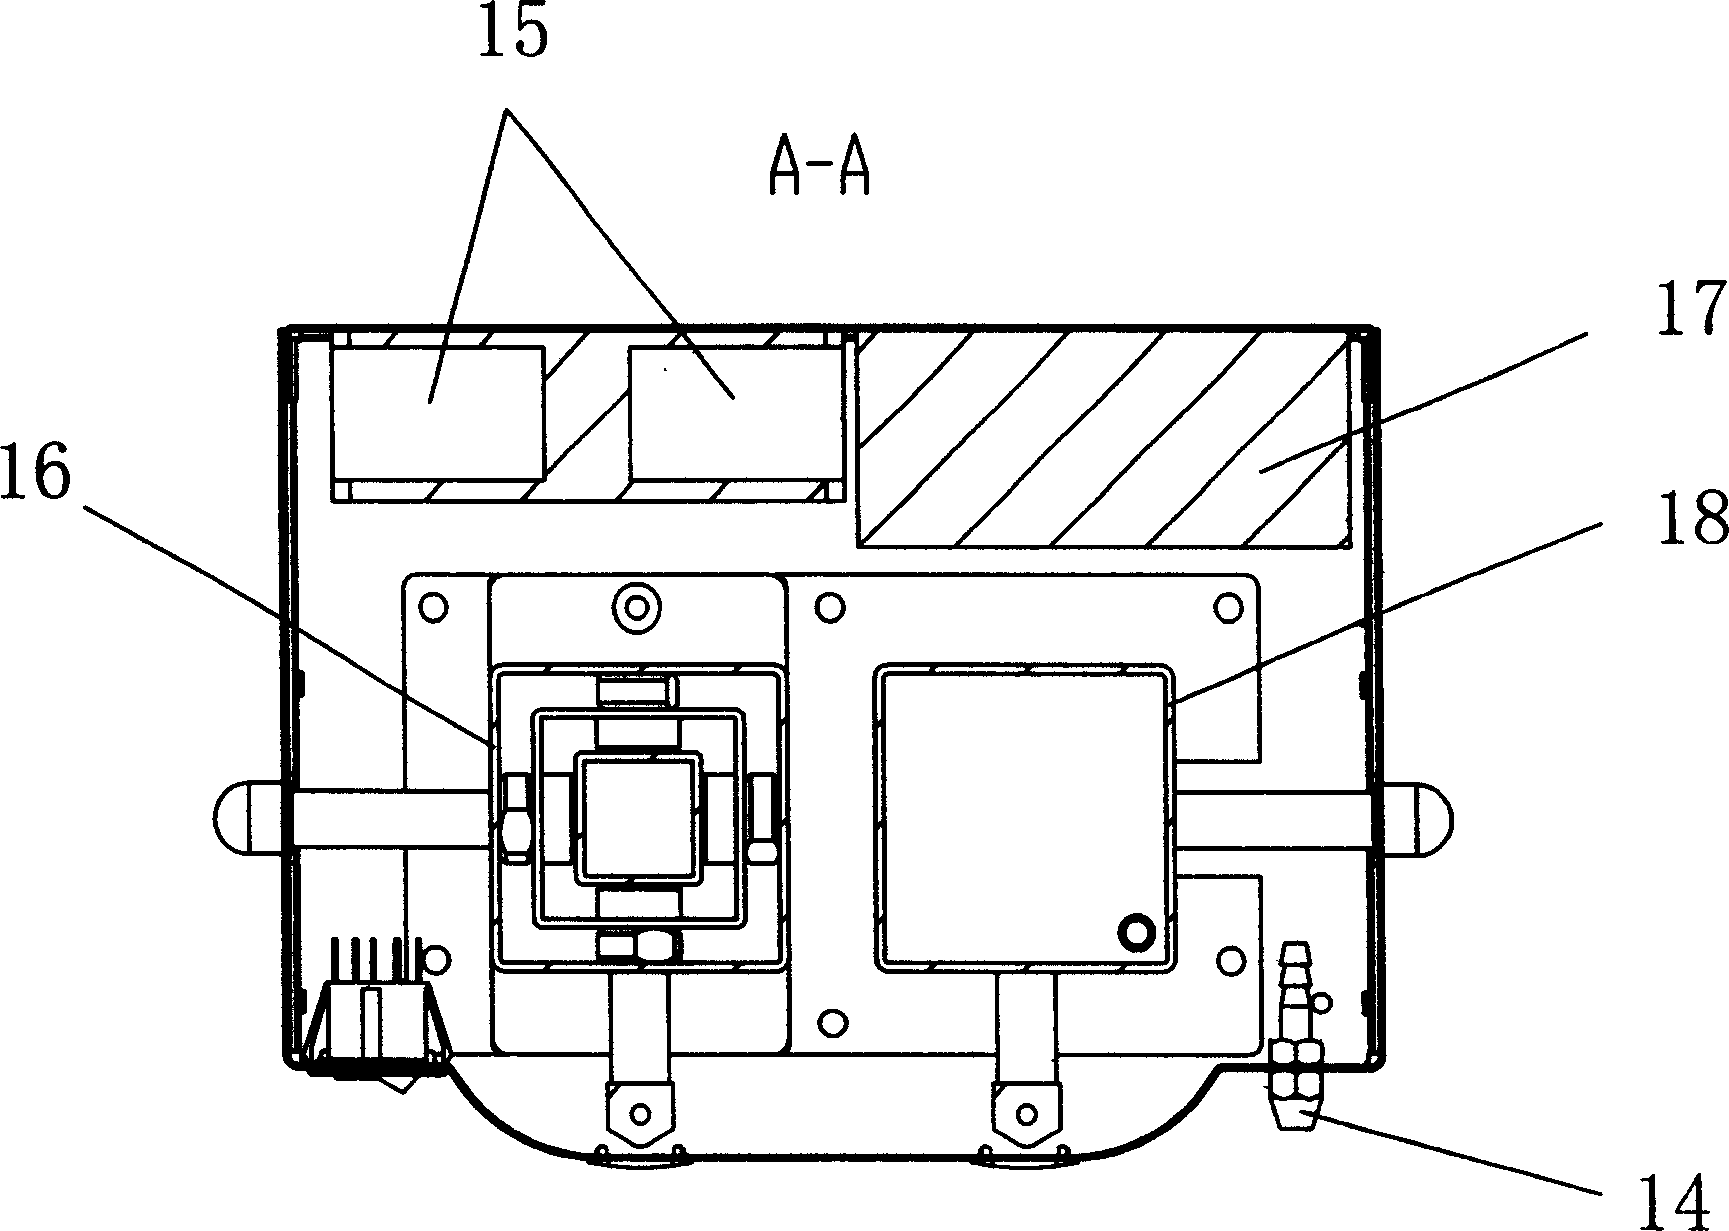 Oxygen-hydrogen heating method and system for soldering iron